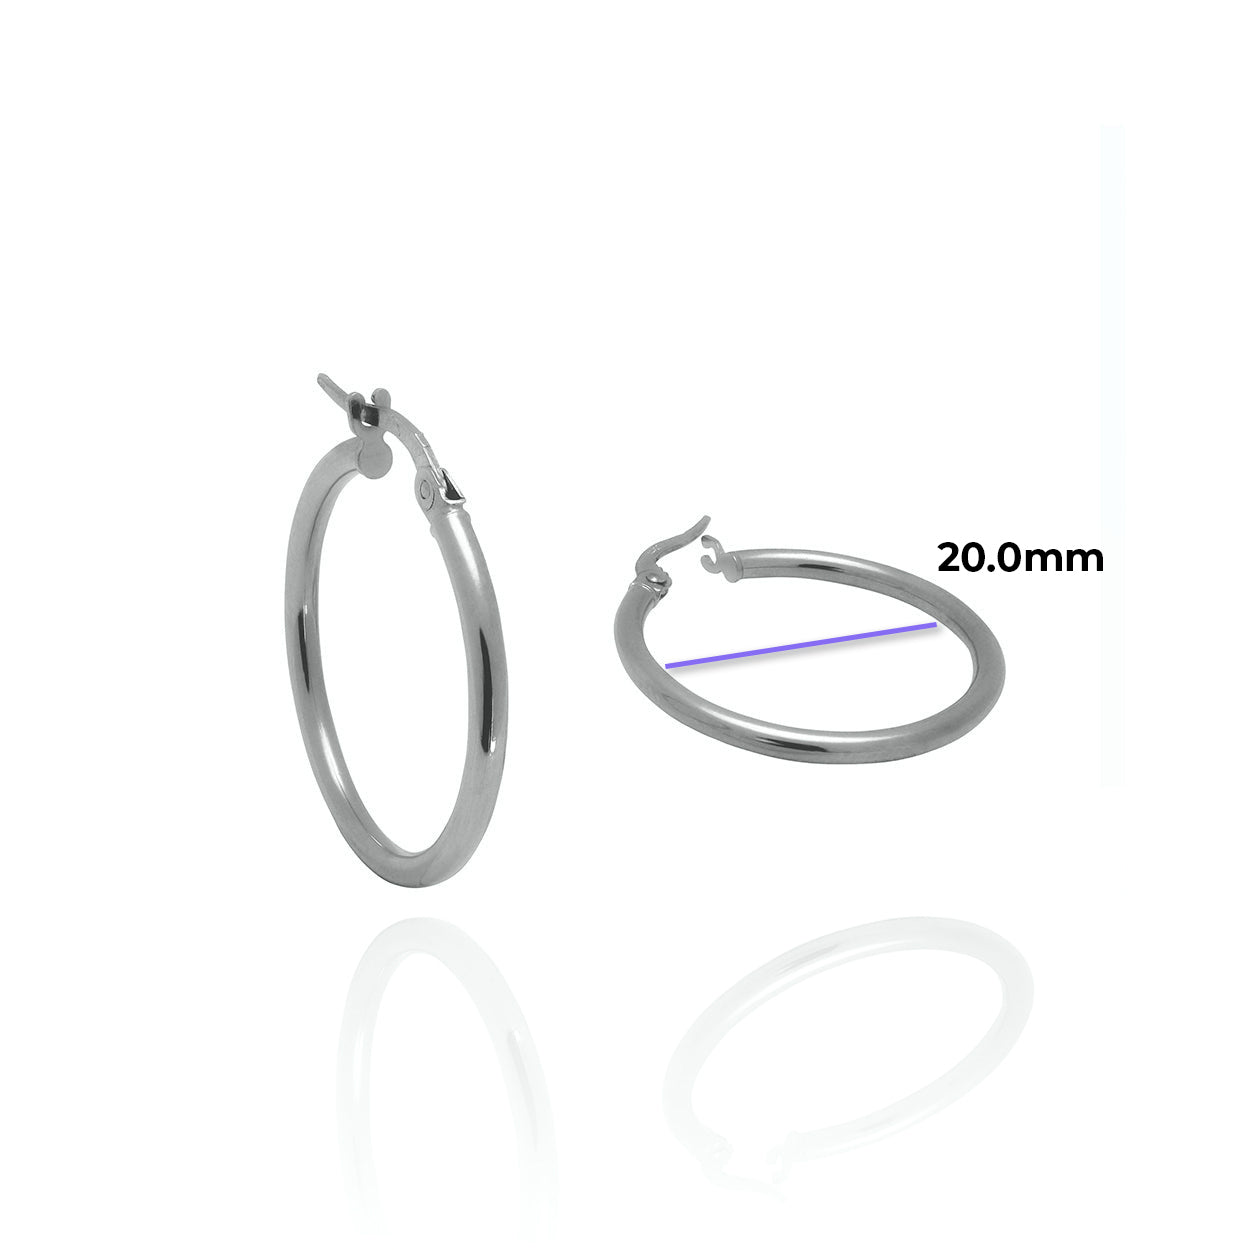 Small Sized 2mm Tube Solid Gold Hoop Earrings White with Measurement 20.0mm